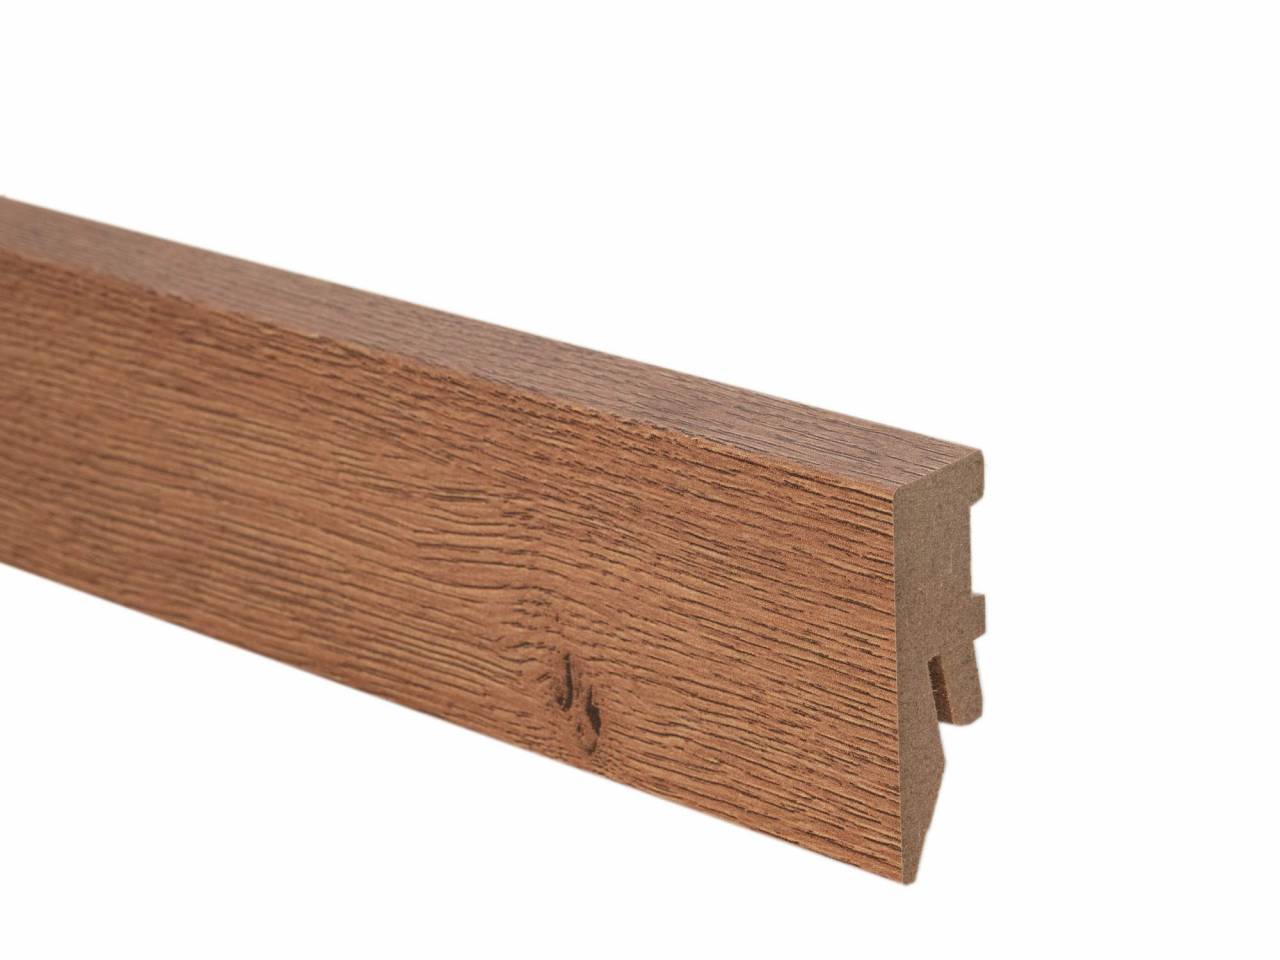 MDF wood floor sill 67226 with cable channel and height 50 mm. Suitable for laminate flooring in brown colour.